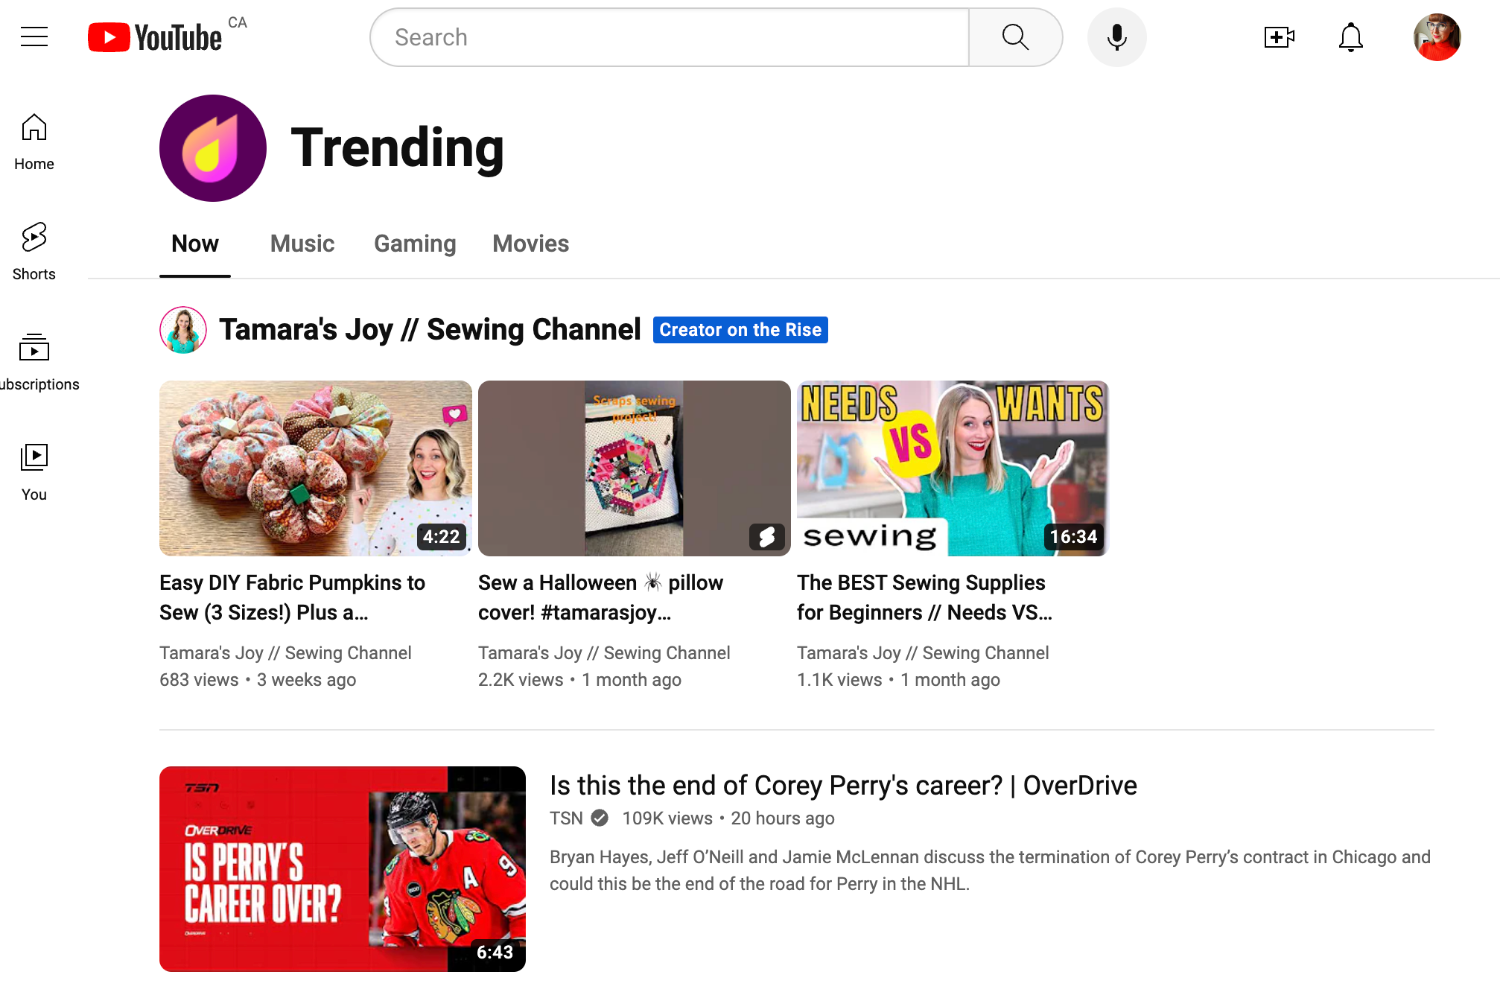 A trends page on YouTube